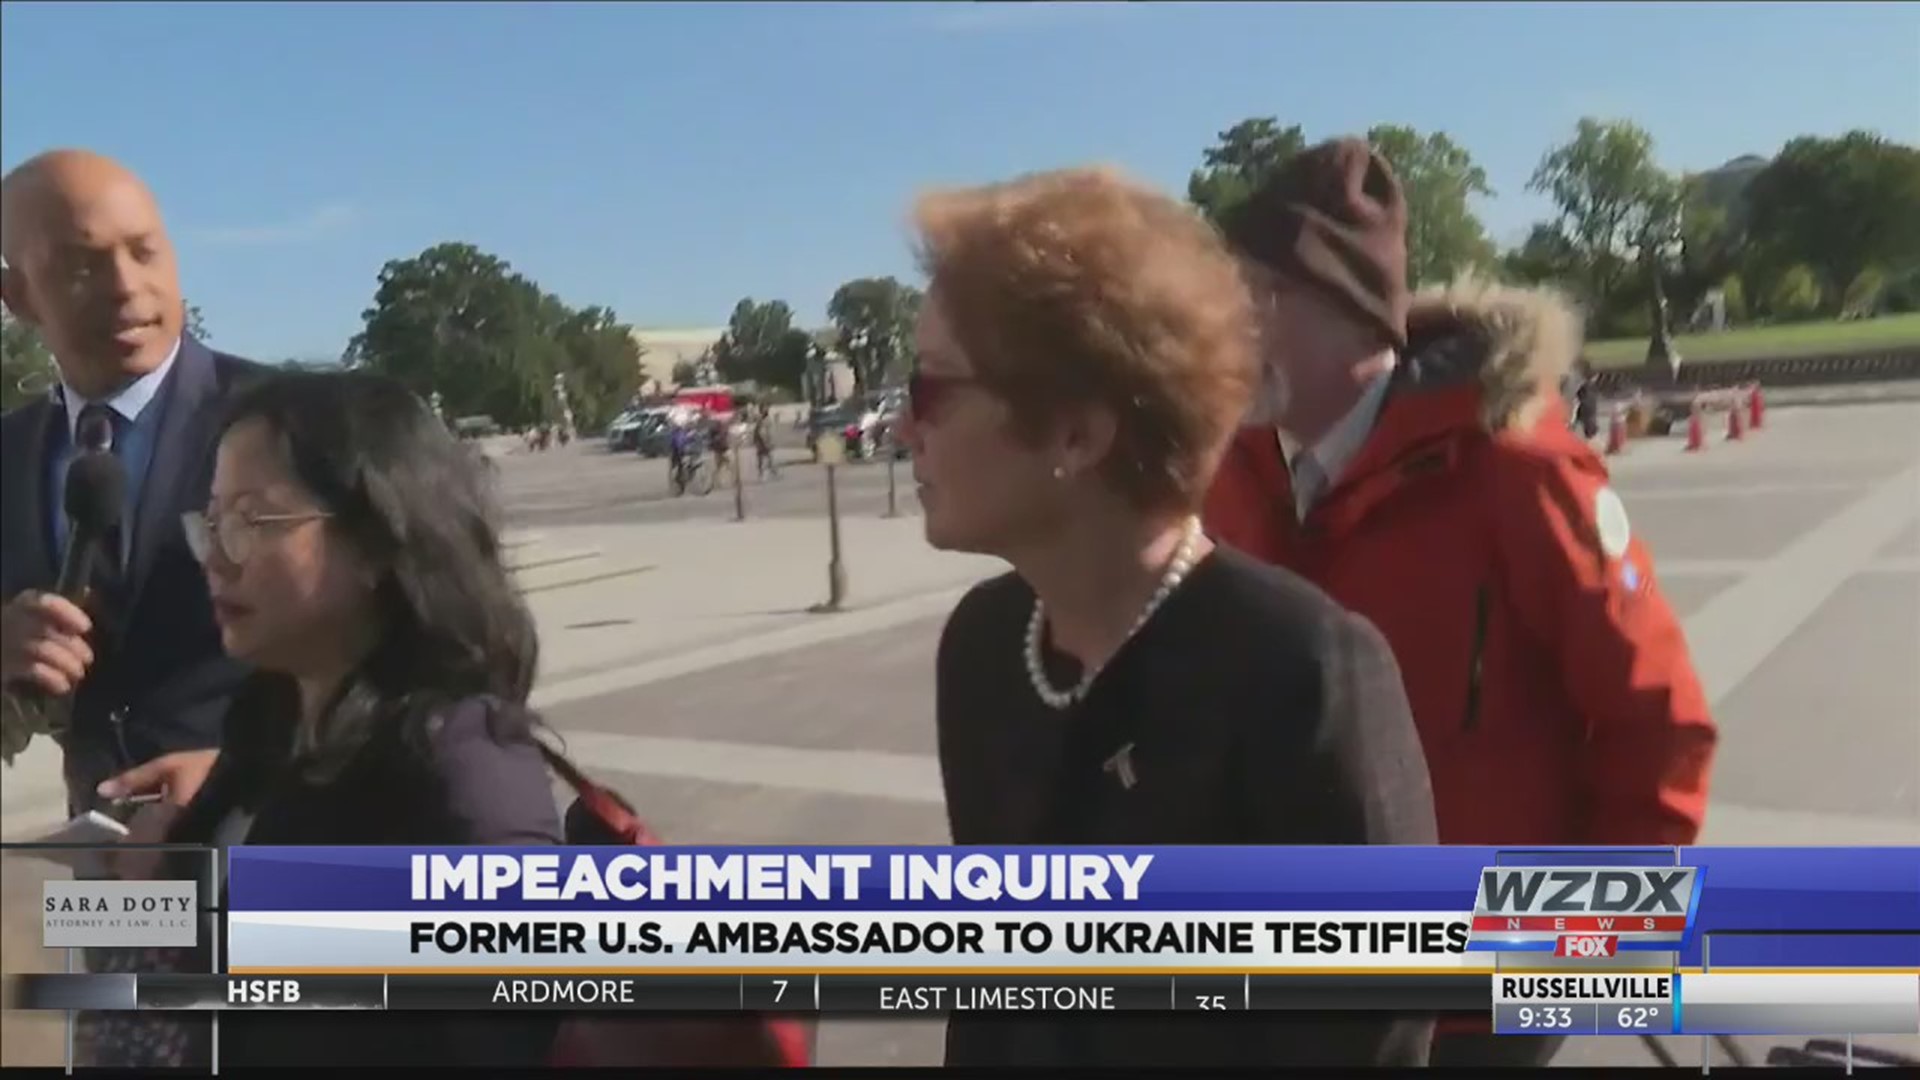 Testifying in defiance of President Donald Trump's ban, former U.S. Ambassador to Ukraine Marie Yovanovitch told House impeachment investigators Friday that Trump himself had pressured the State Department to oust her from her post and get her out of the country.